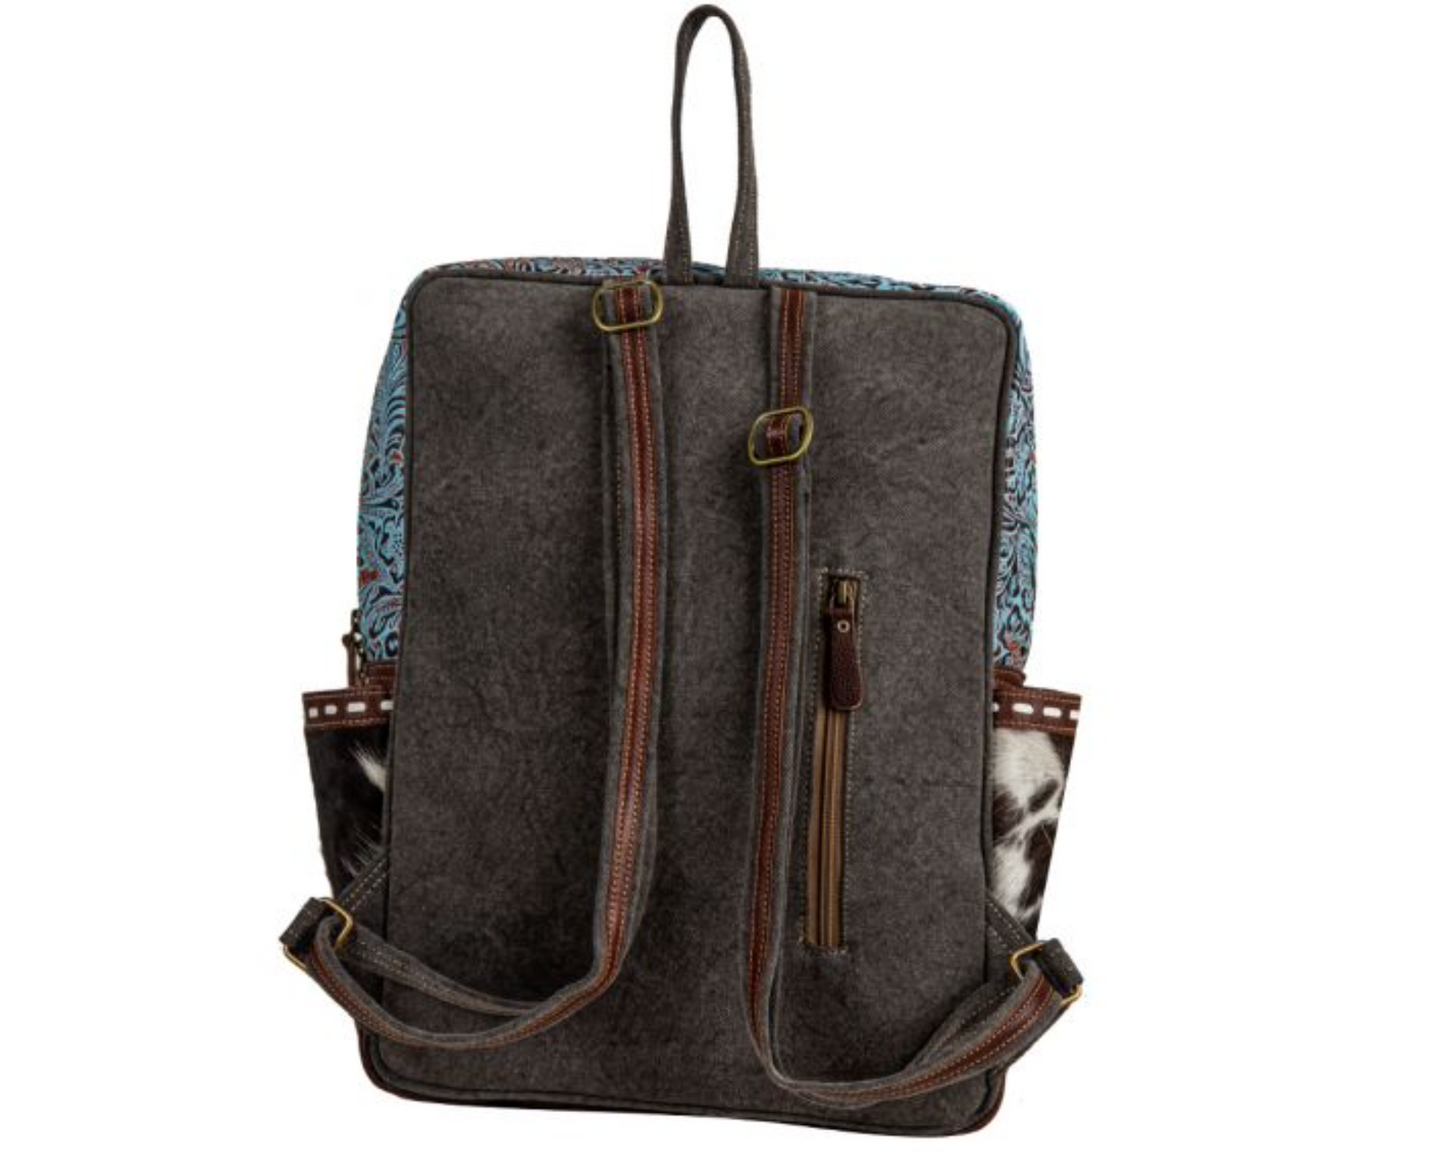 Chisum Draw Paneled Concealed-Carry Backpack Bag